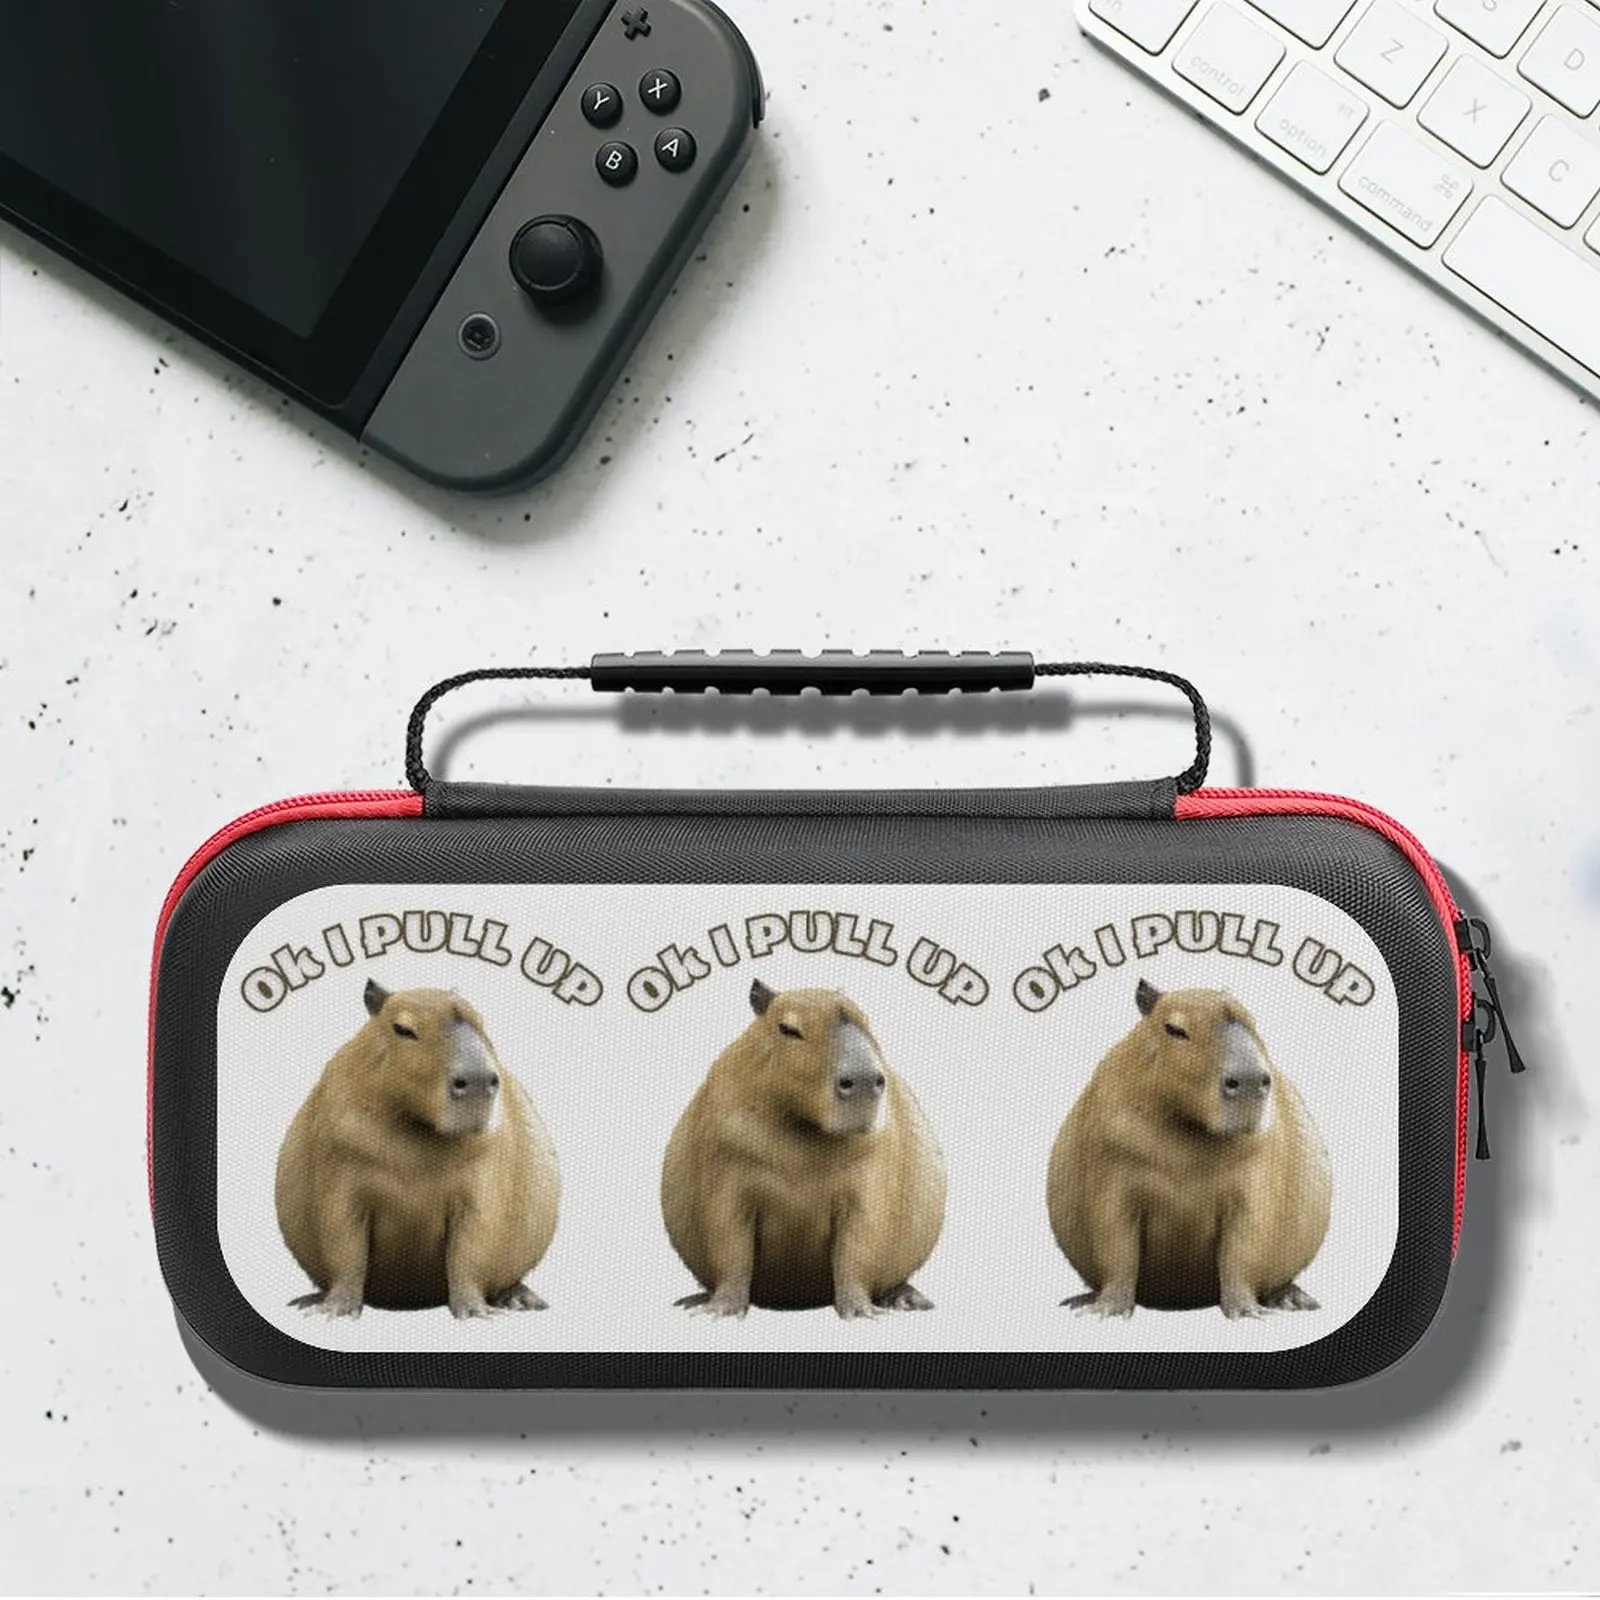 

Ok I PULL UP Capybara Storage Bag For Nintendo Switch Real Live Animal Coconut Compact Portable Pouch Daily NS Console